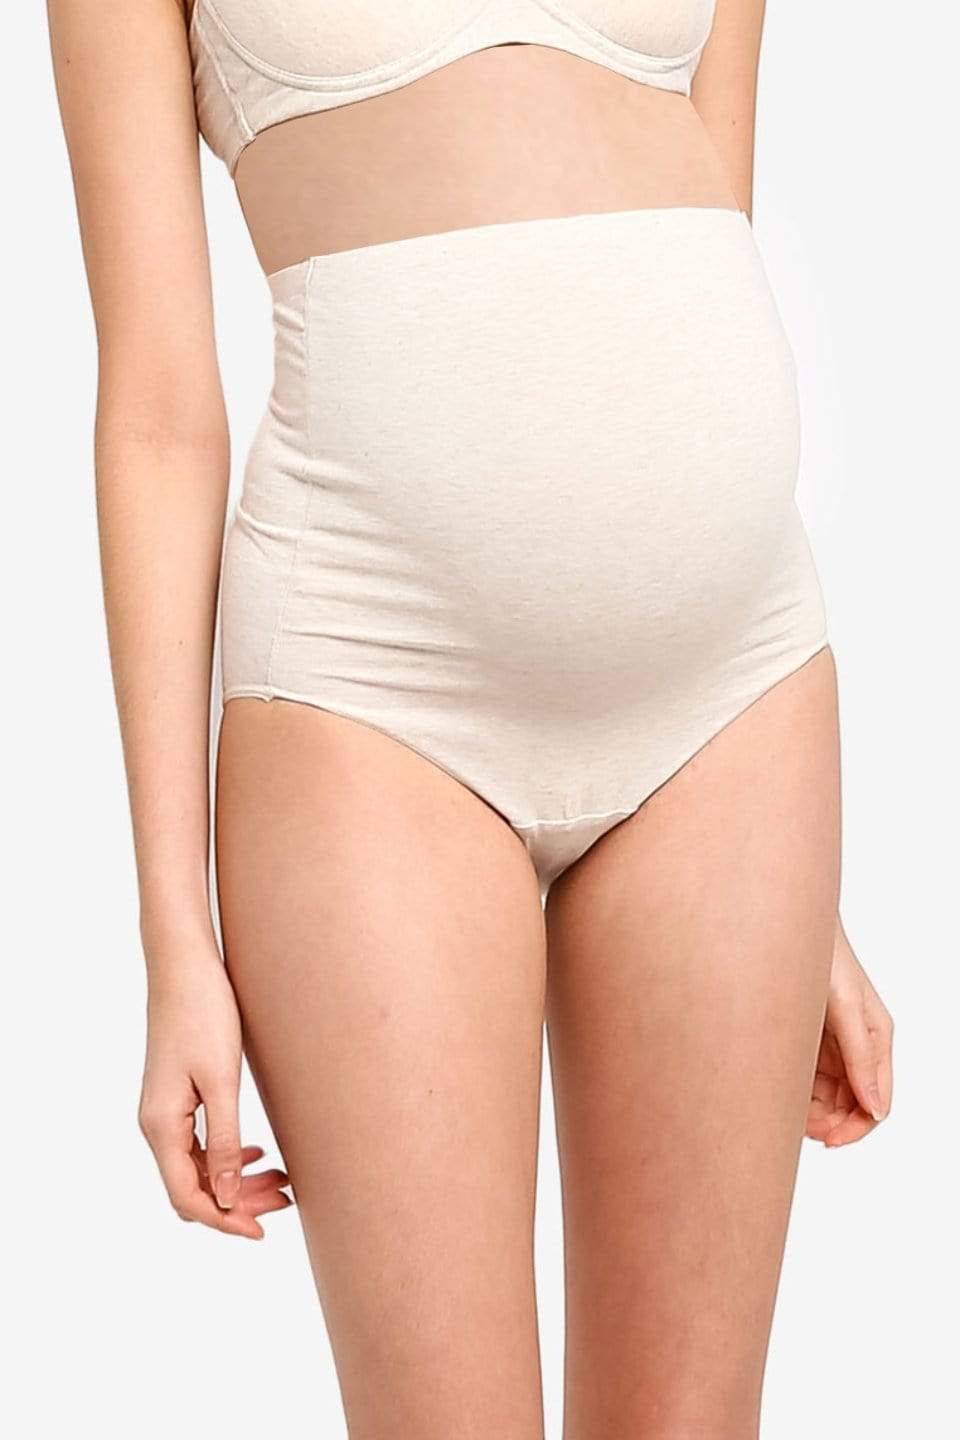 Buy DISOLVE� Hi-Waist Support Pregnancy Panties for Pregnant Women Seamless  Underwear Maternity Shapewear Plus Size (6 to 10 Months) Pack of 2 at